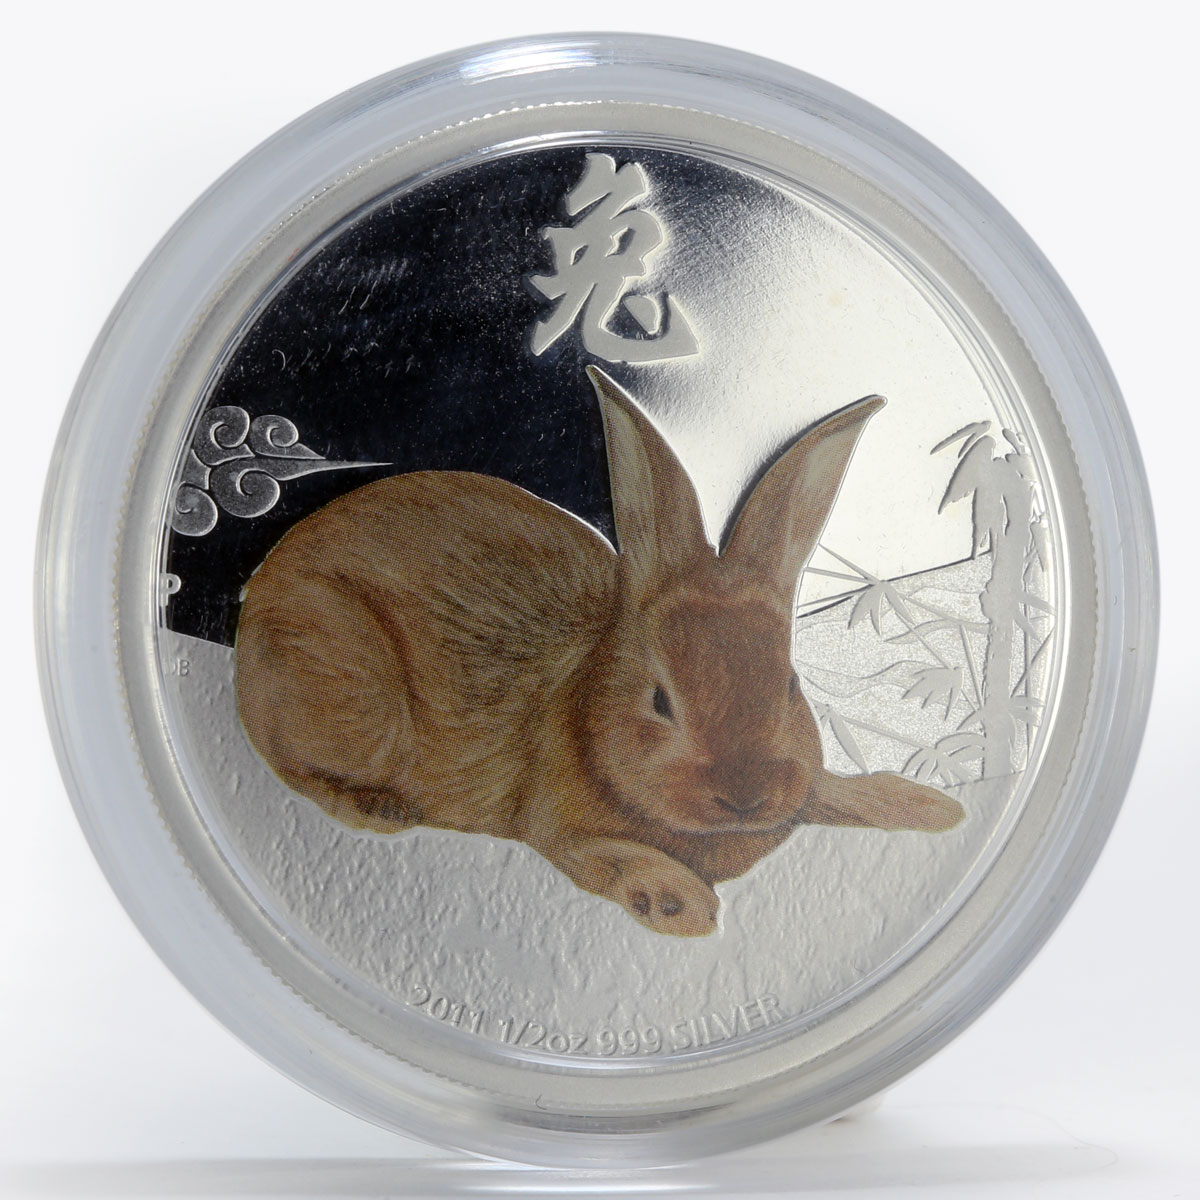 Cook Islands 50 cents Year of the Rabbit Lunar Zodiac colored silver coin 2011